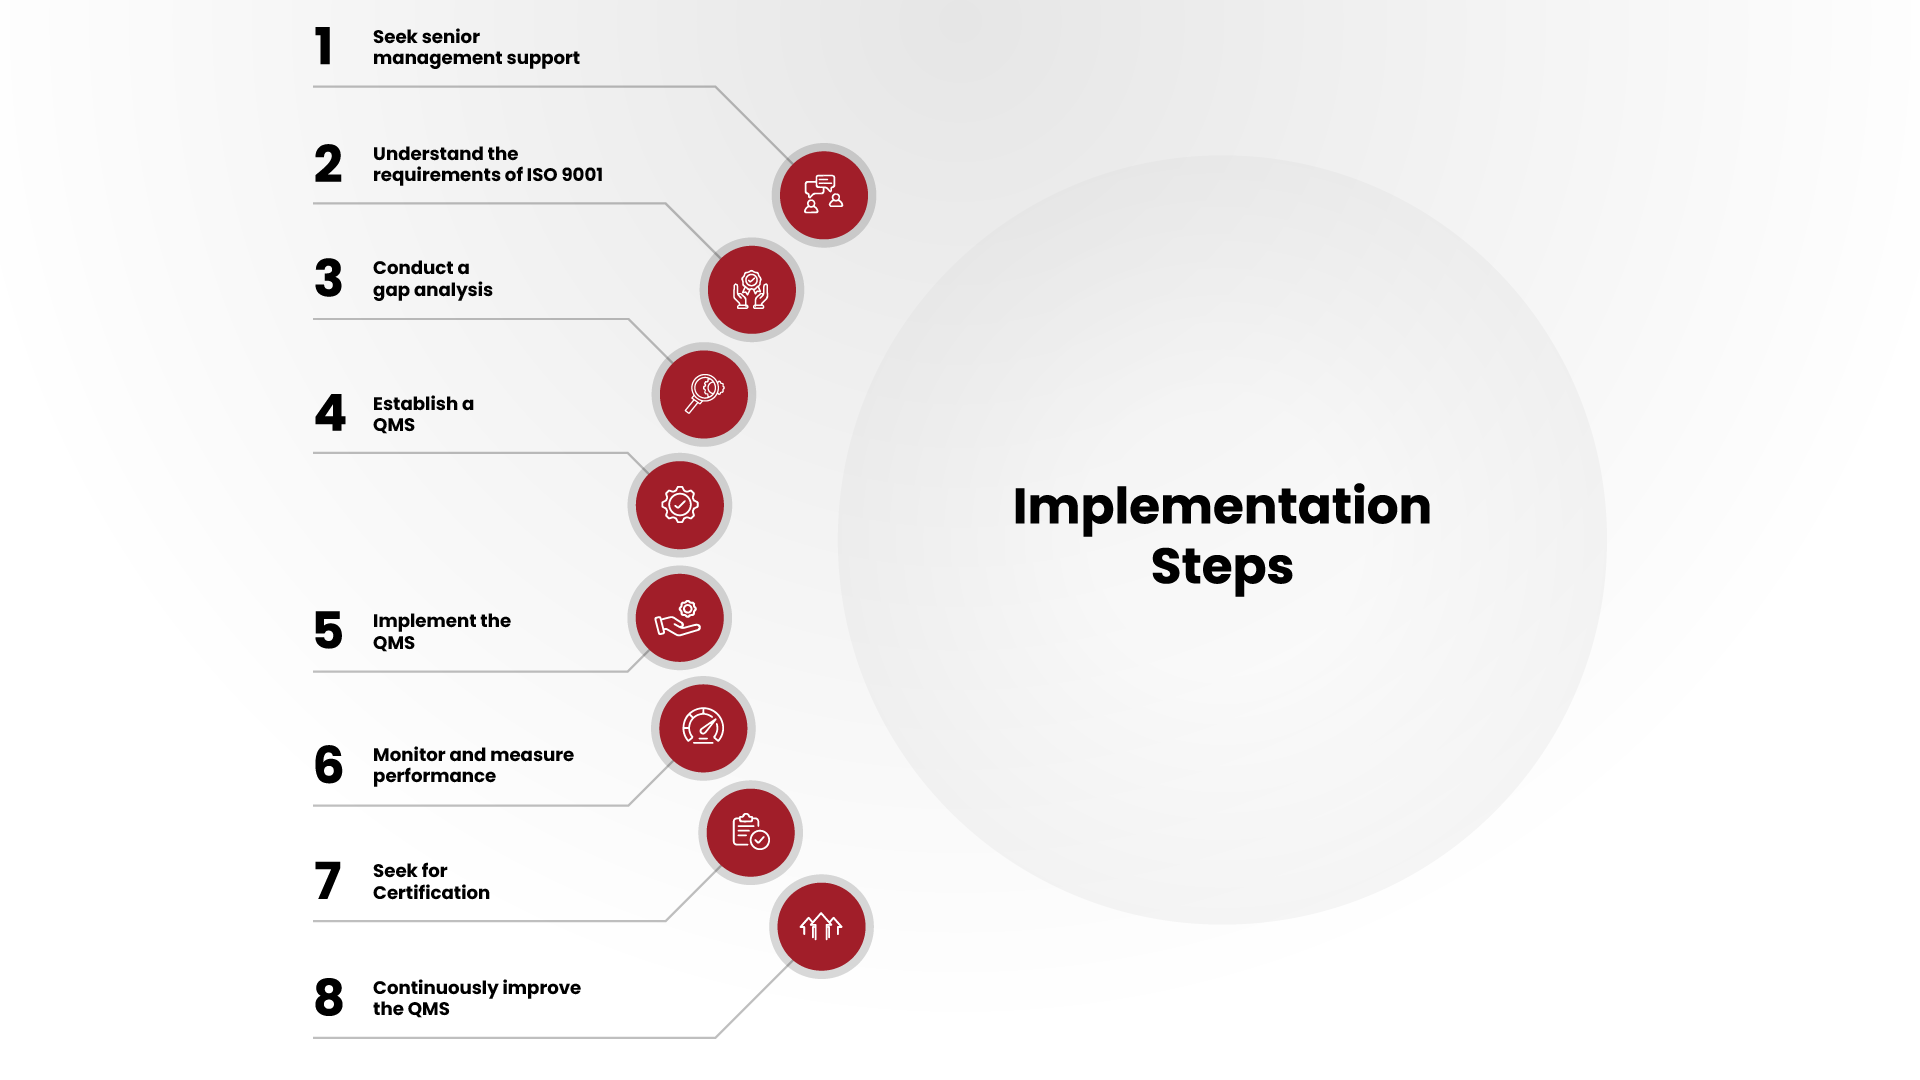 key implementation steps of ISO 9001